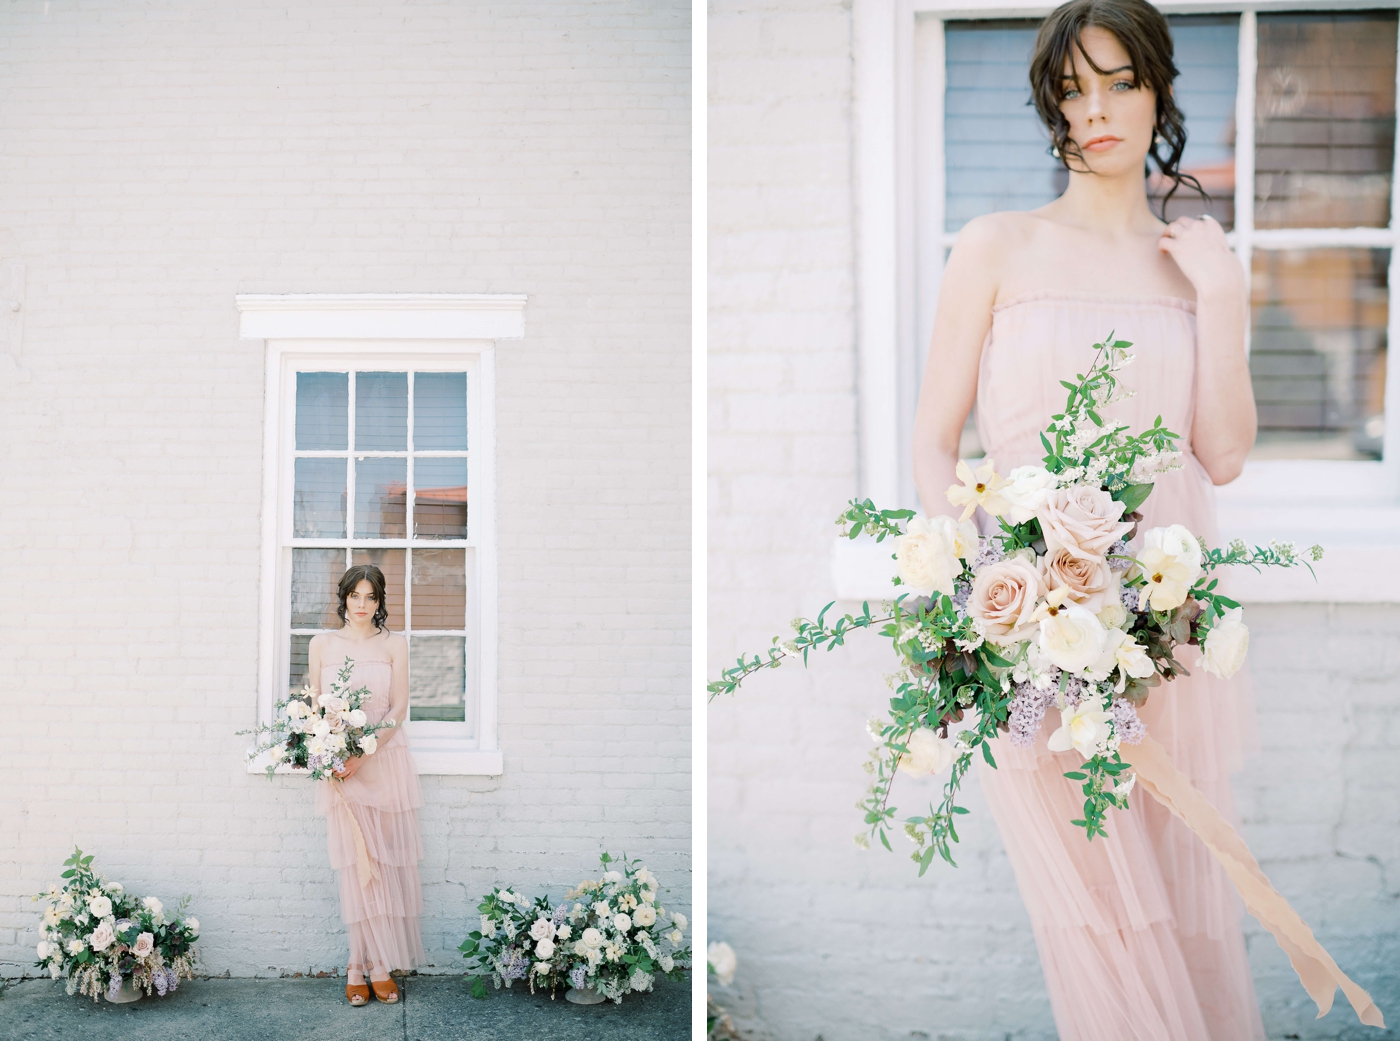 Wild Indigo 1:1 floral workshop with Aesthetic Events & Florals in Harrisburg, PA